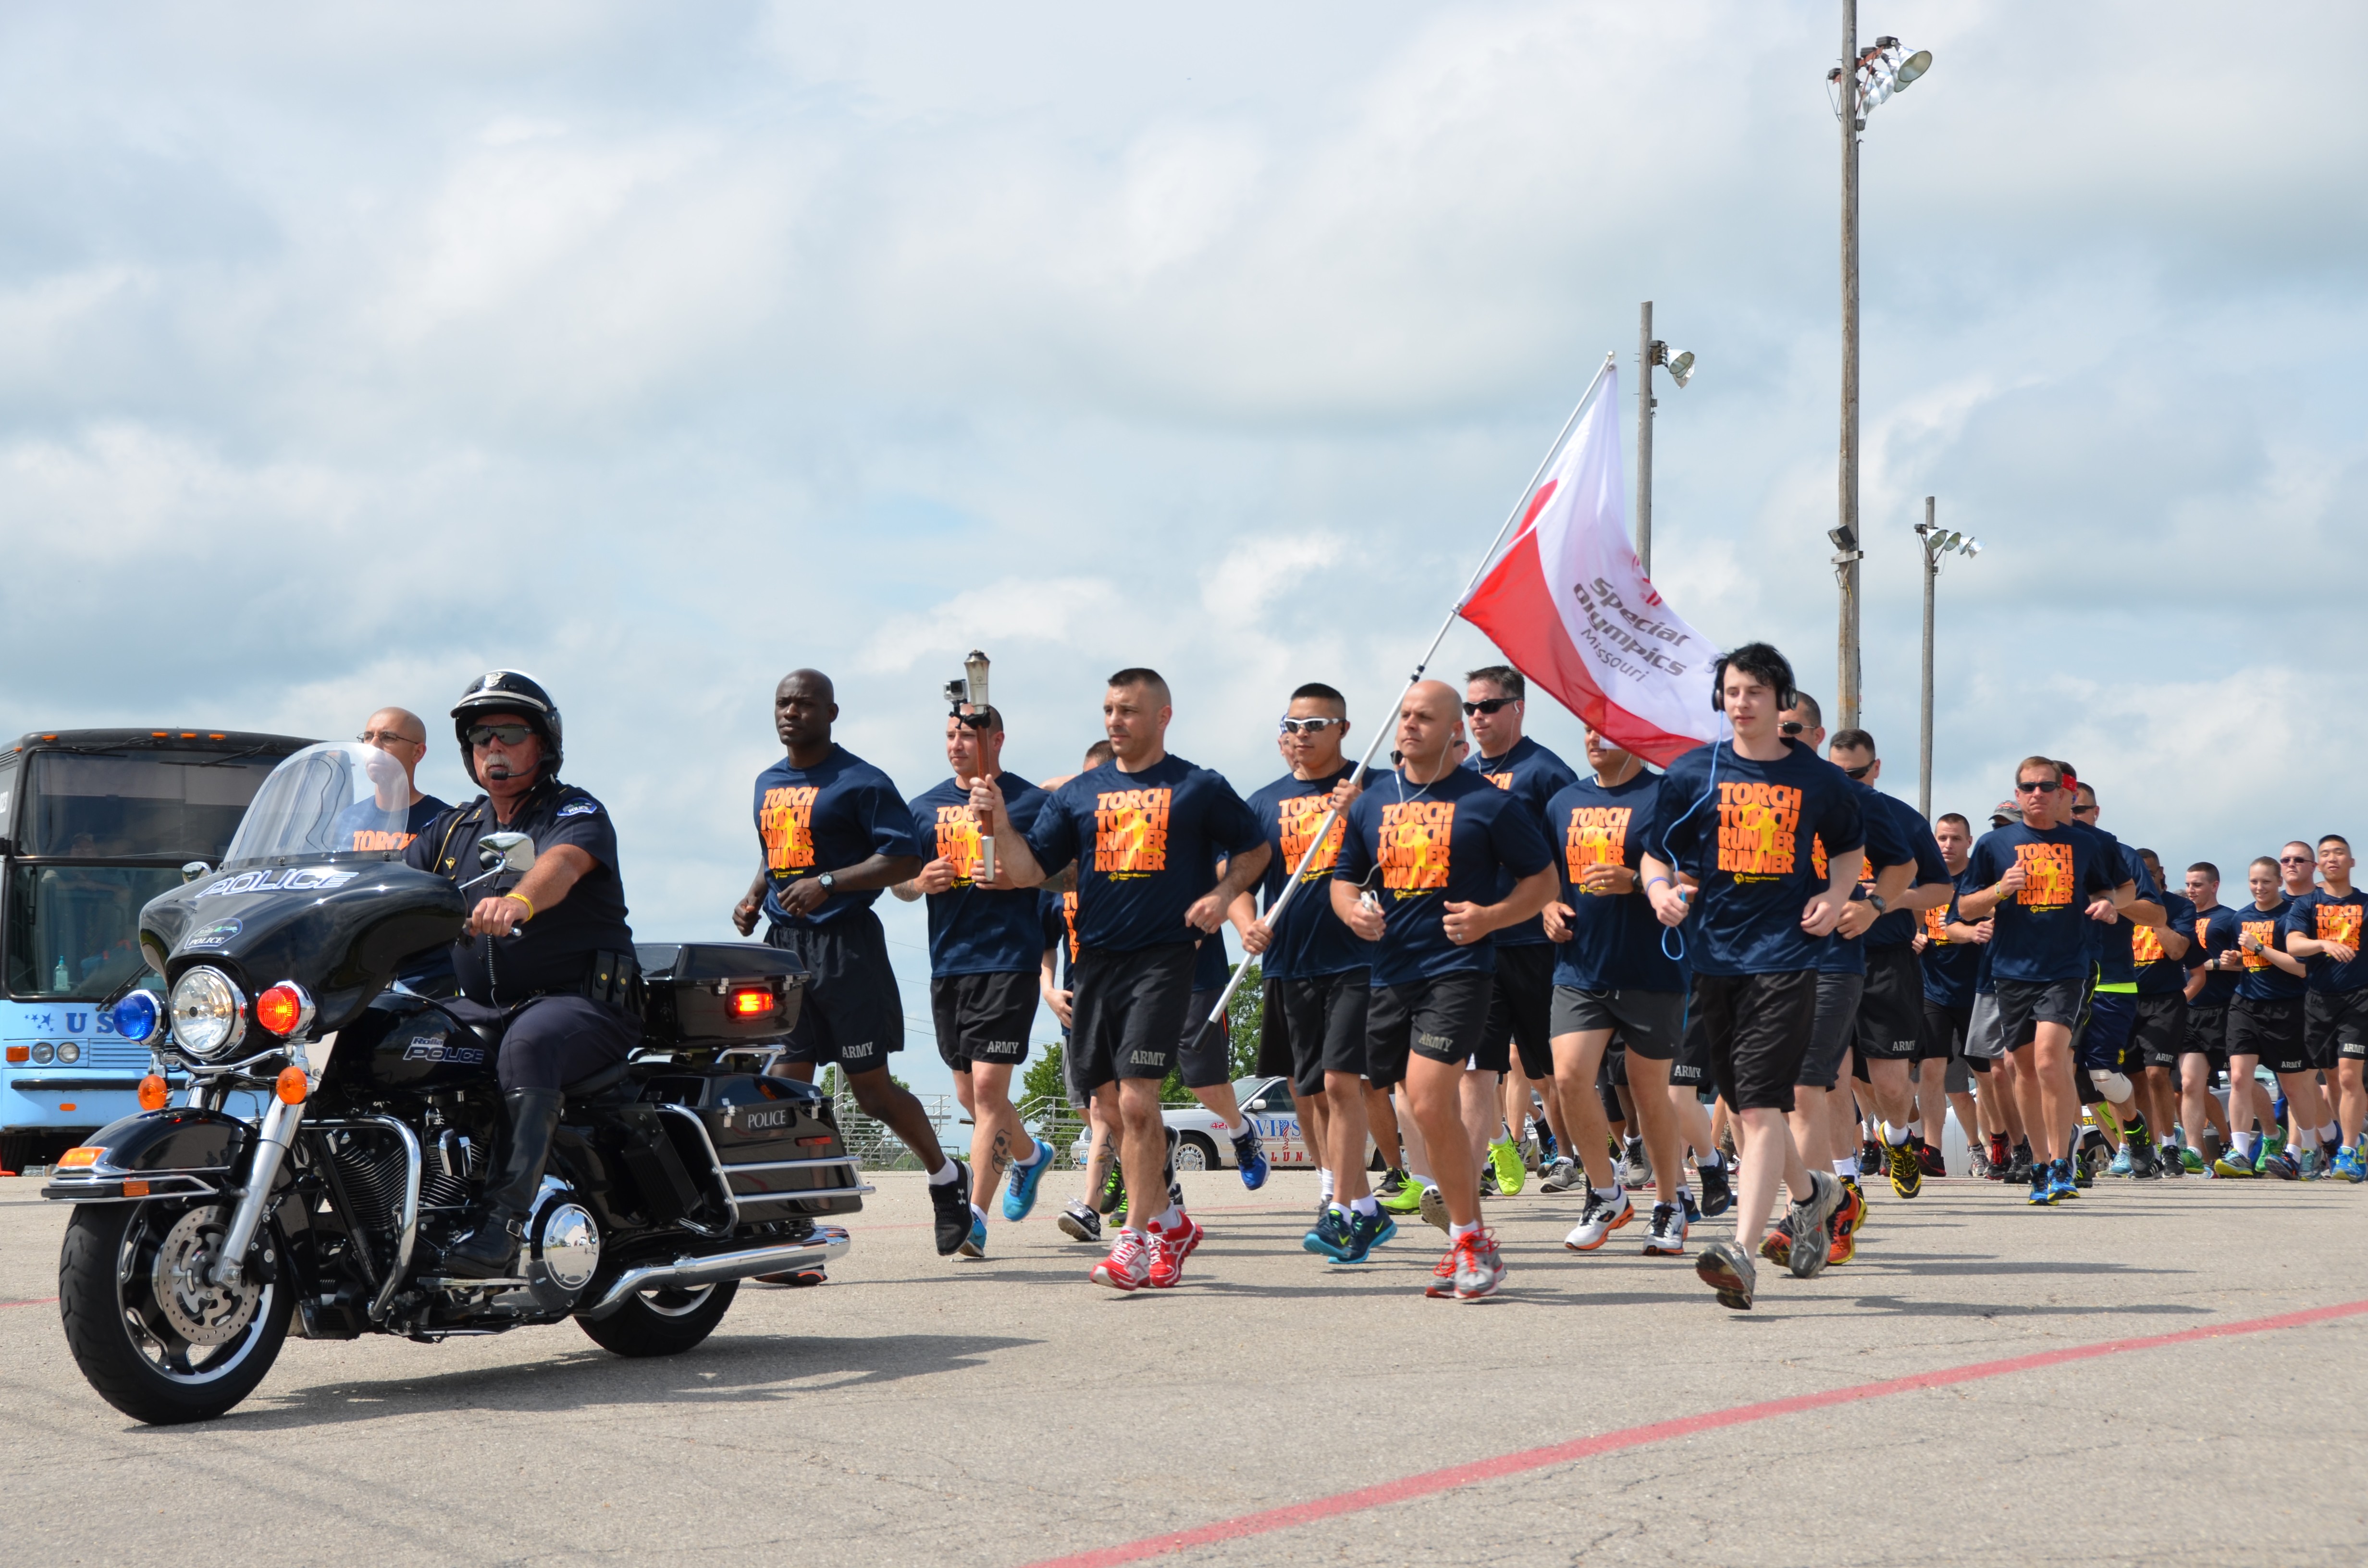 MPs conduct Special Olympics torch run Article The United States Army